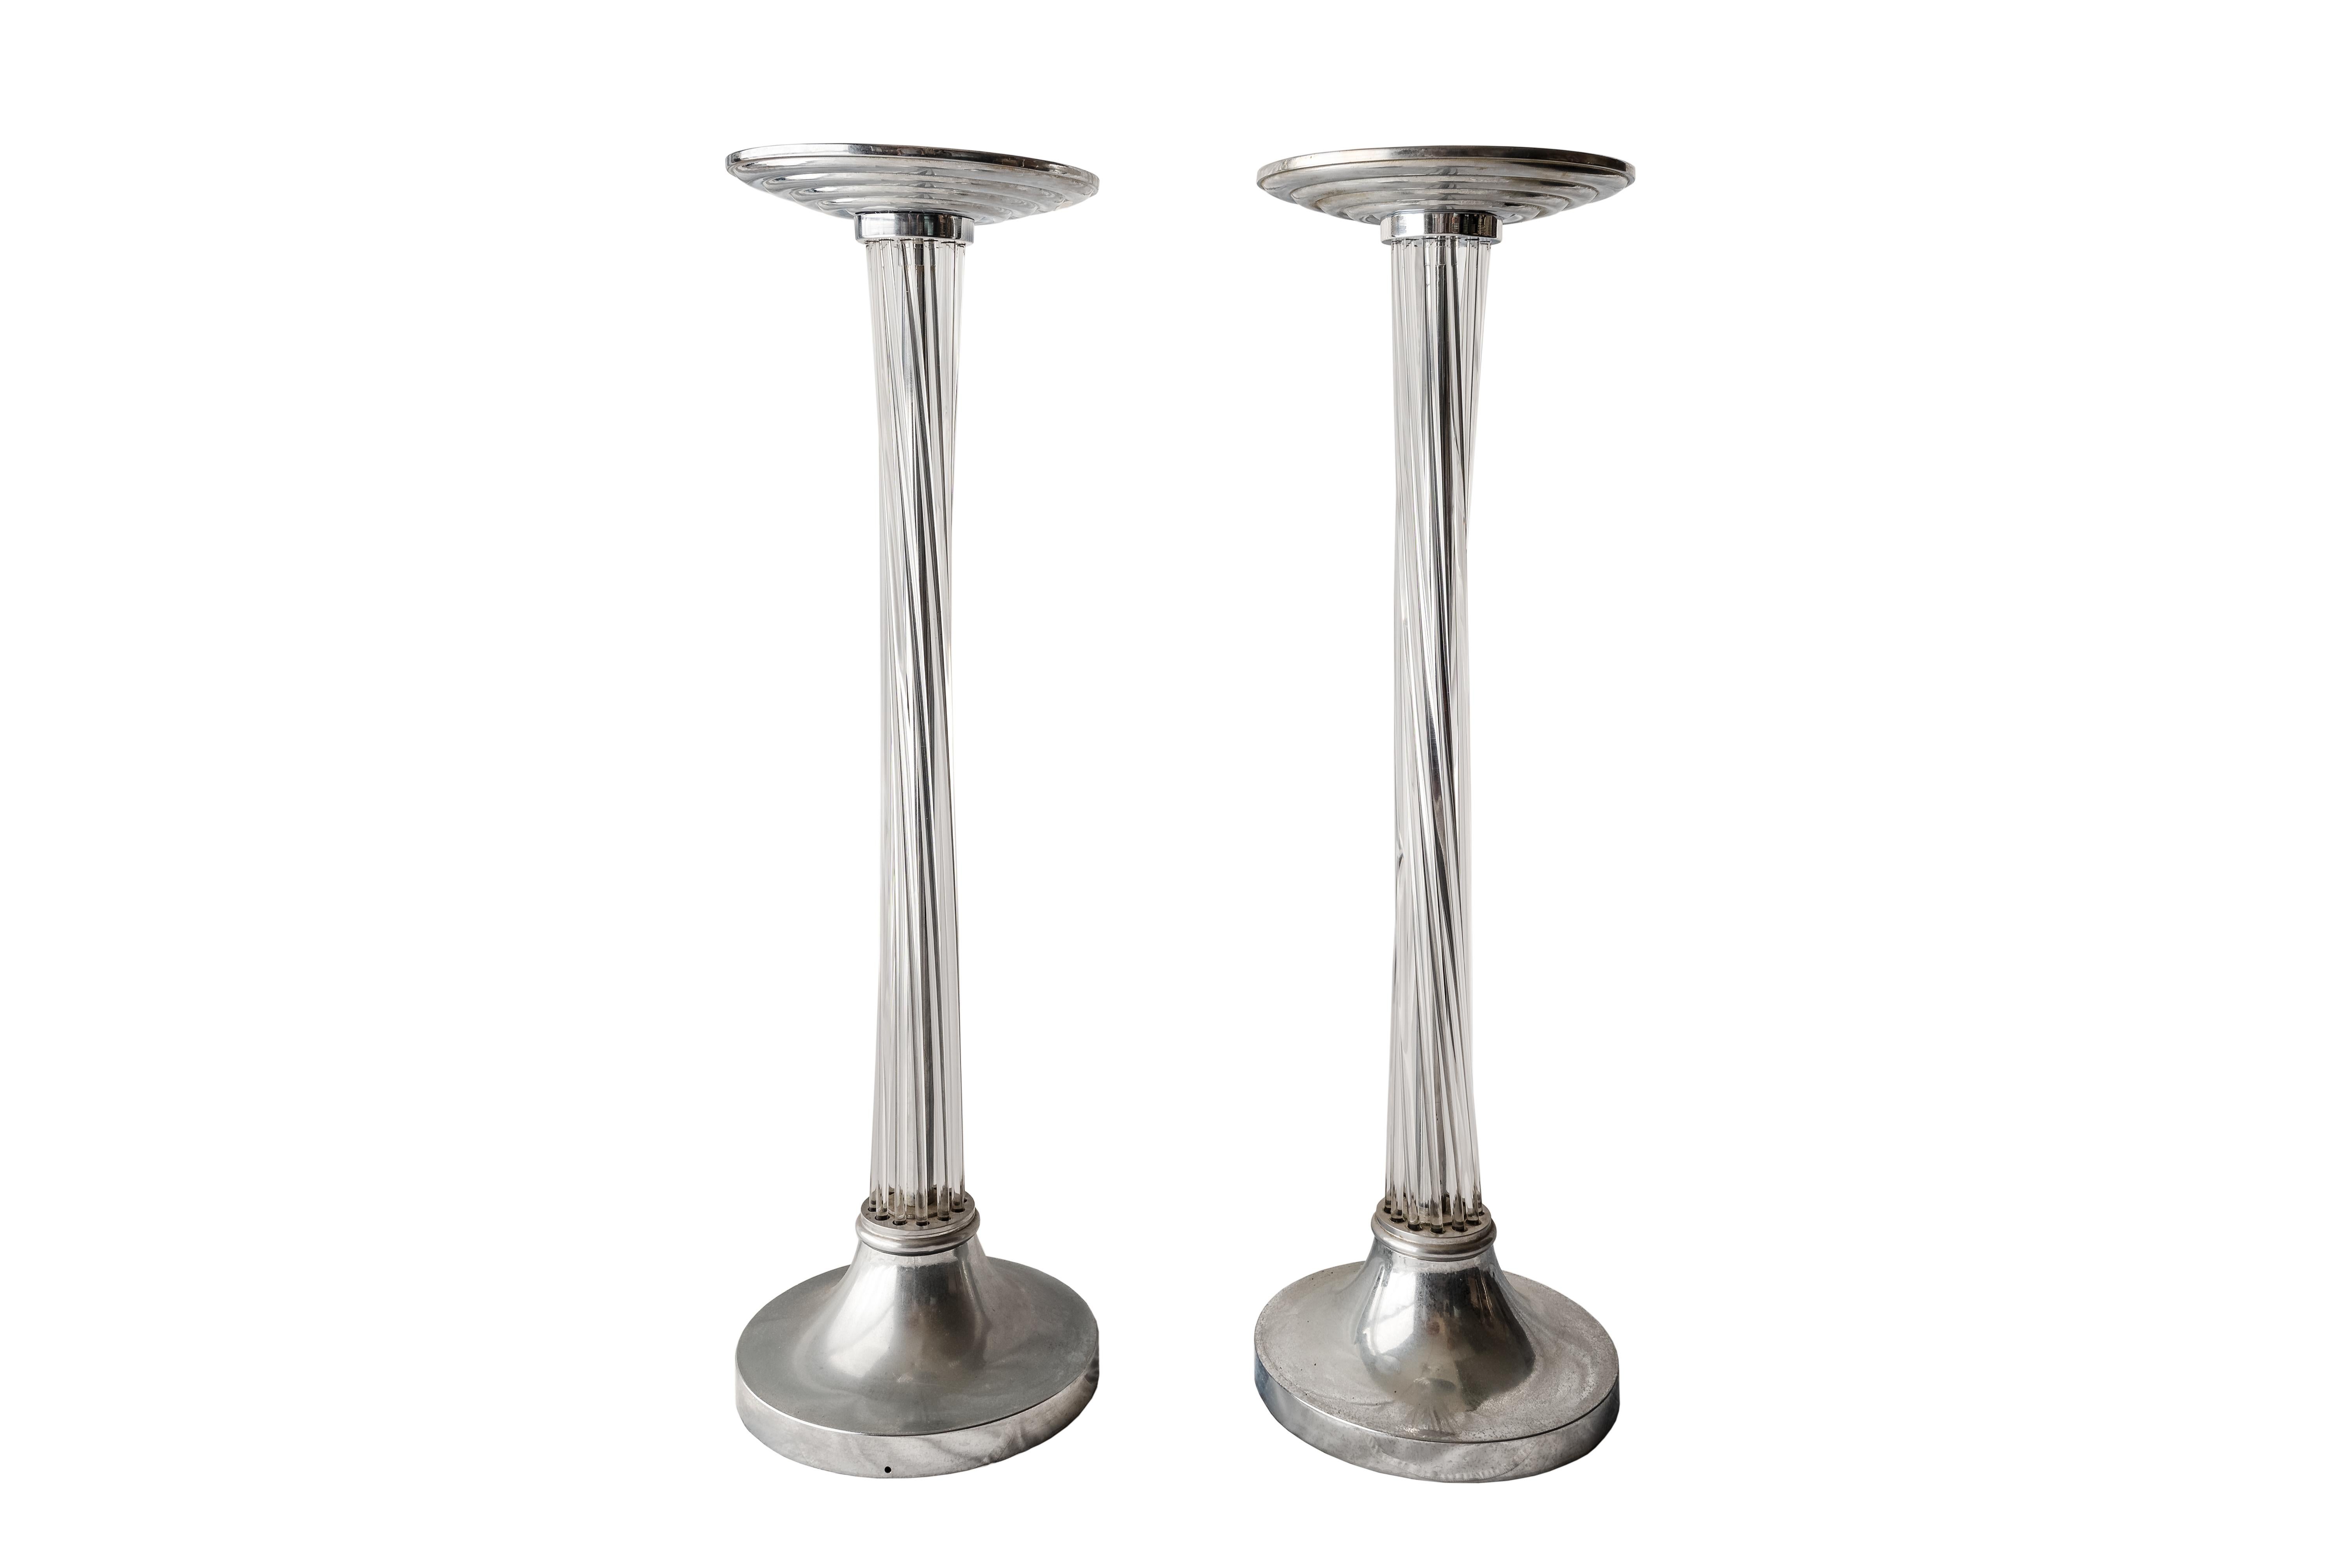 French Art Deco Chrome and Acrylic Pedestals Stands Columns, 1930